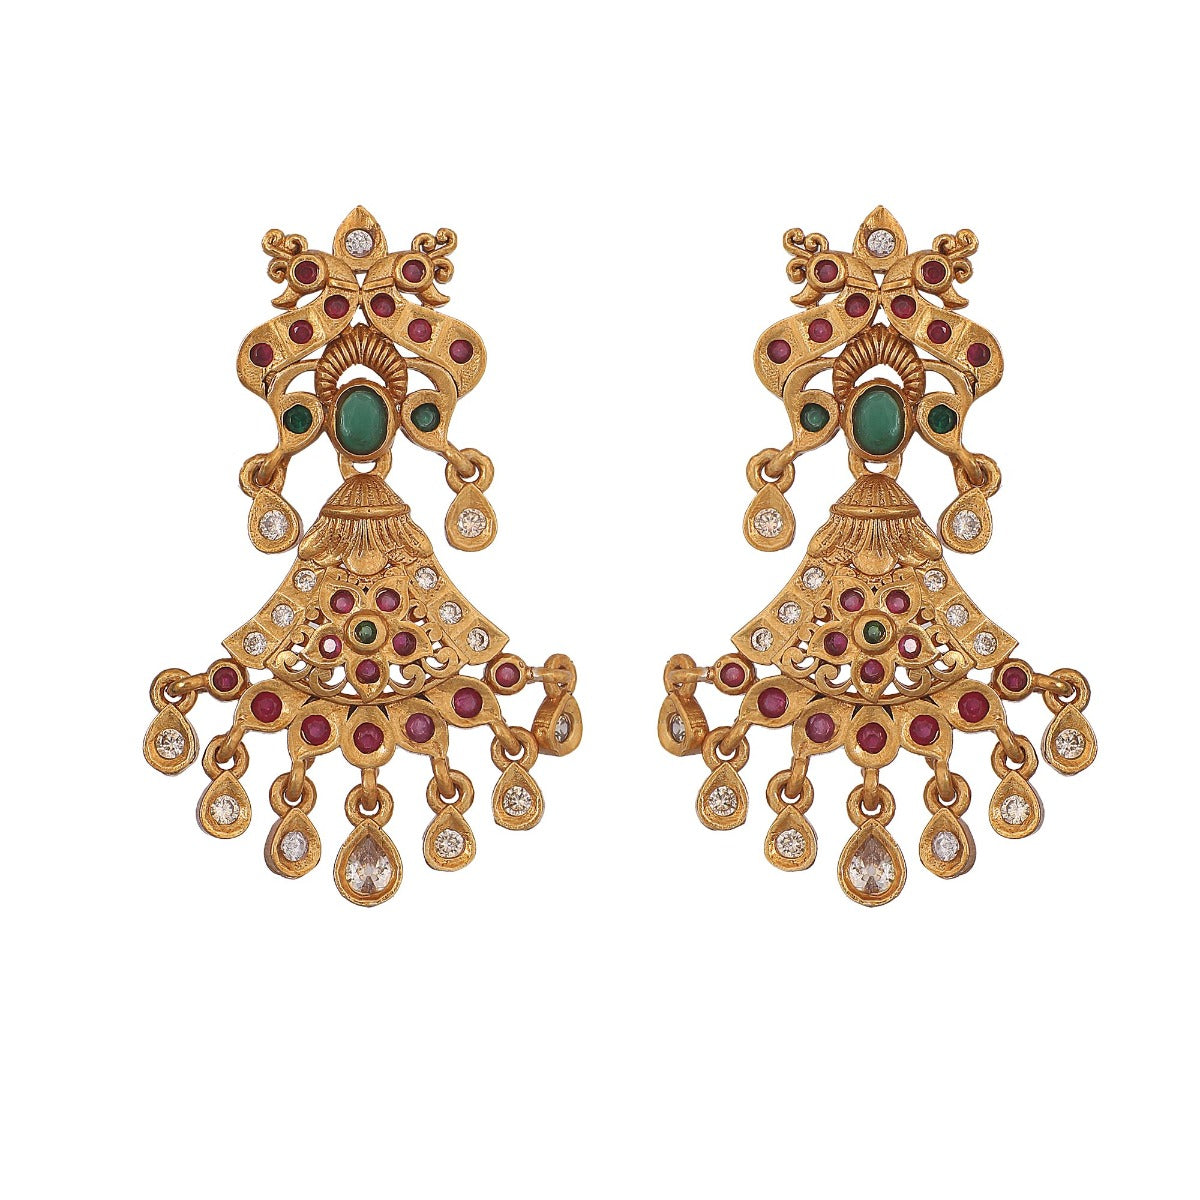 Antique Gold Plated Jayati Necklace Earrings Set